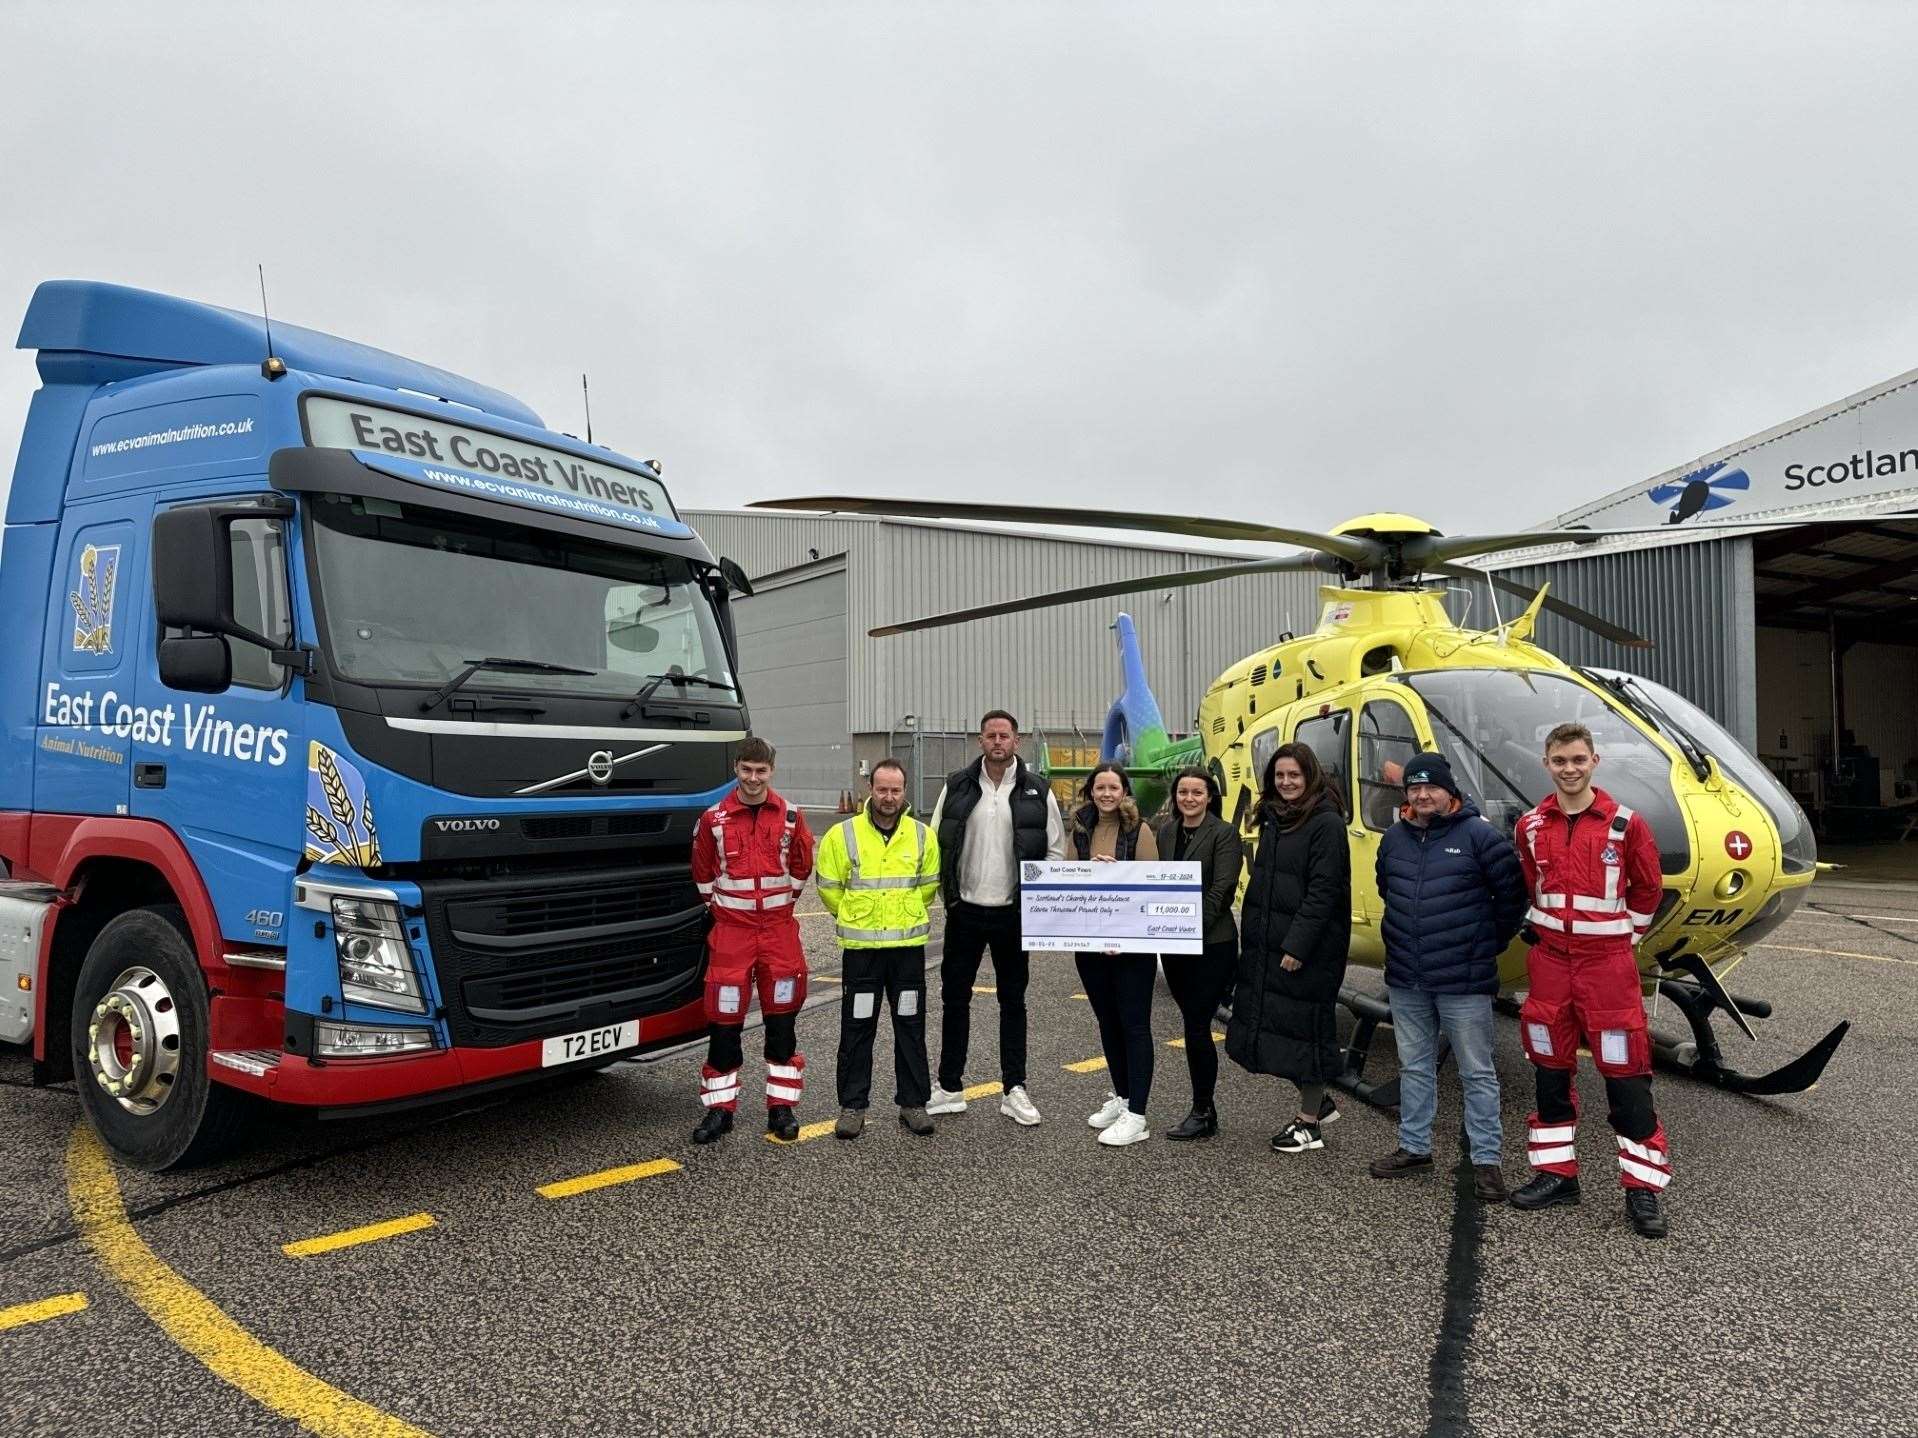 Staff from East Coast Viners and Spratt's presented a cheque to the Scottish Charity Air Ambulance.